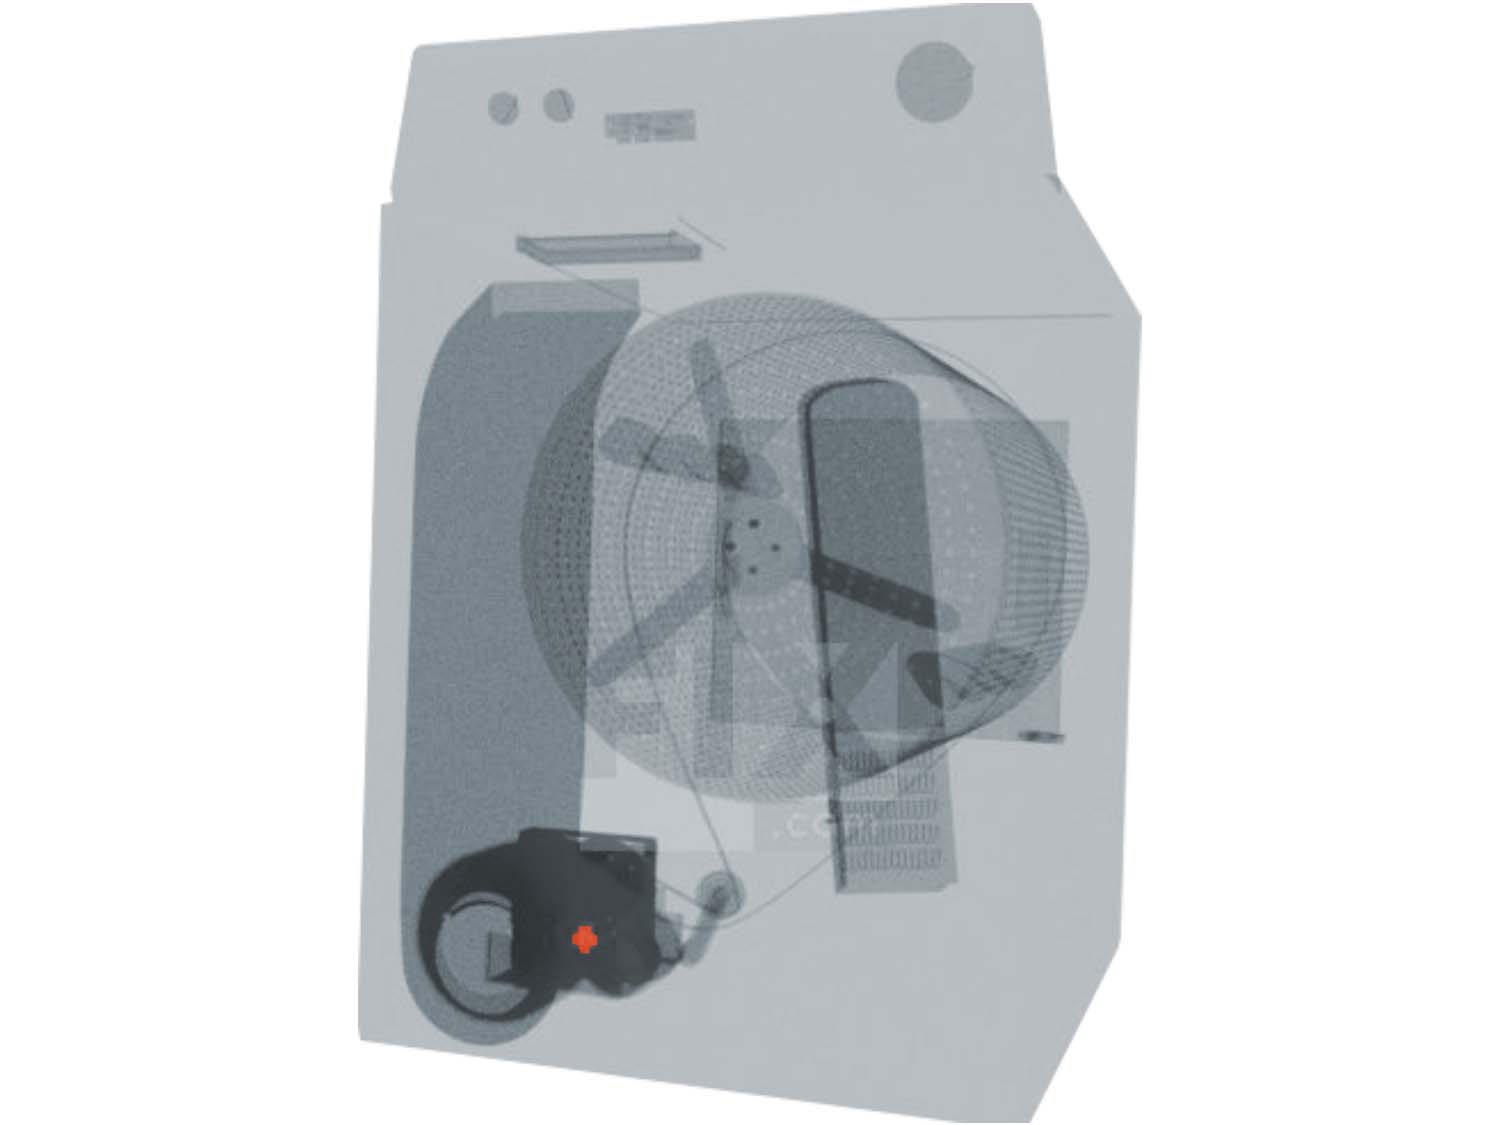 A 3D diagram showing the components of a dryer and specifying the location of the cycling thermostat